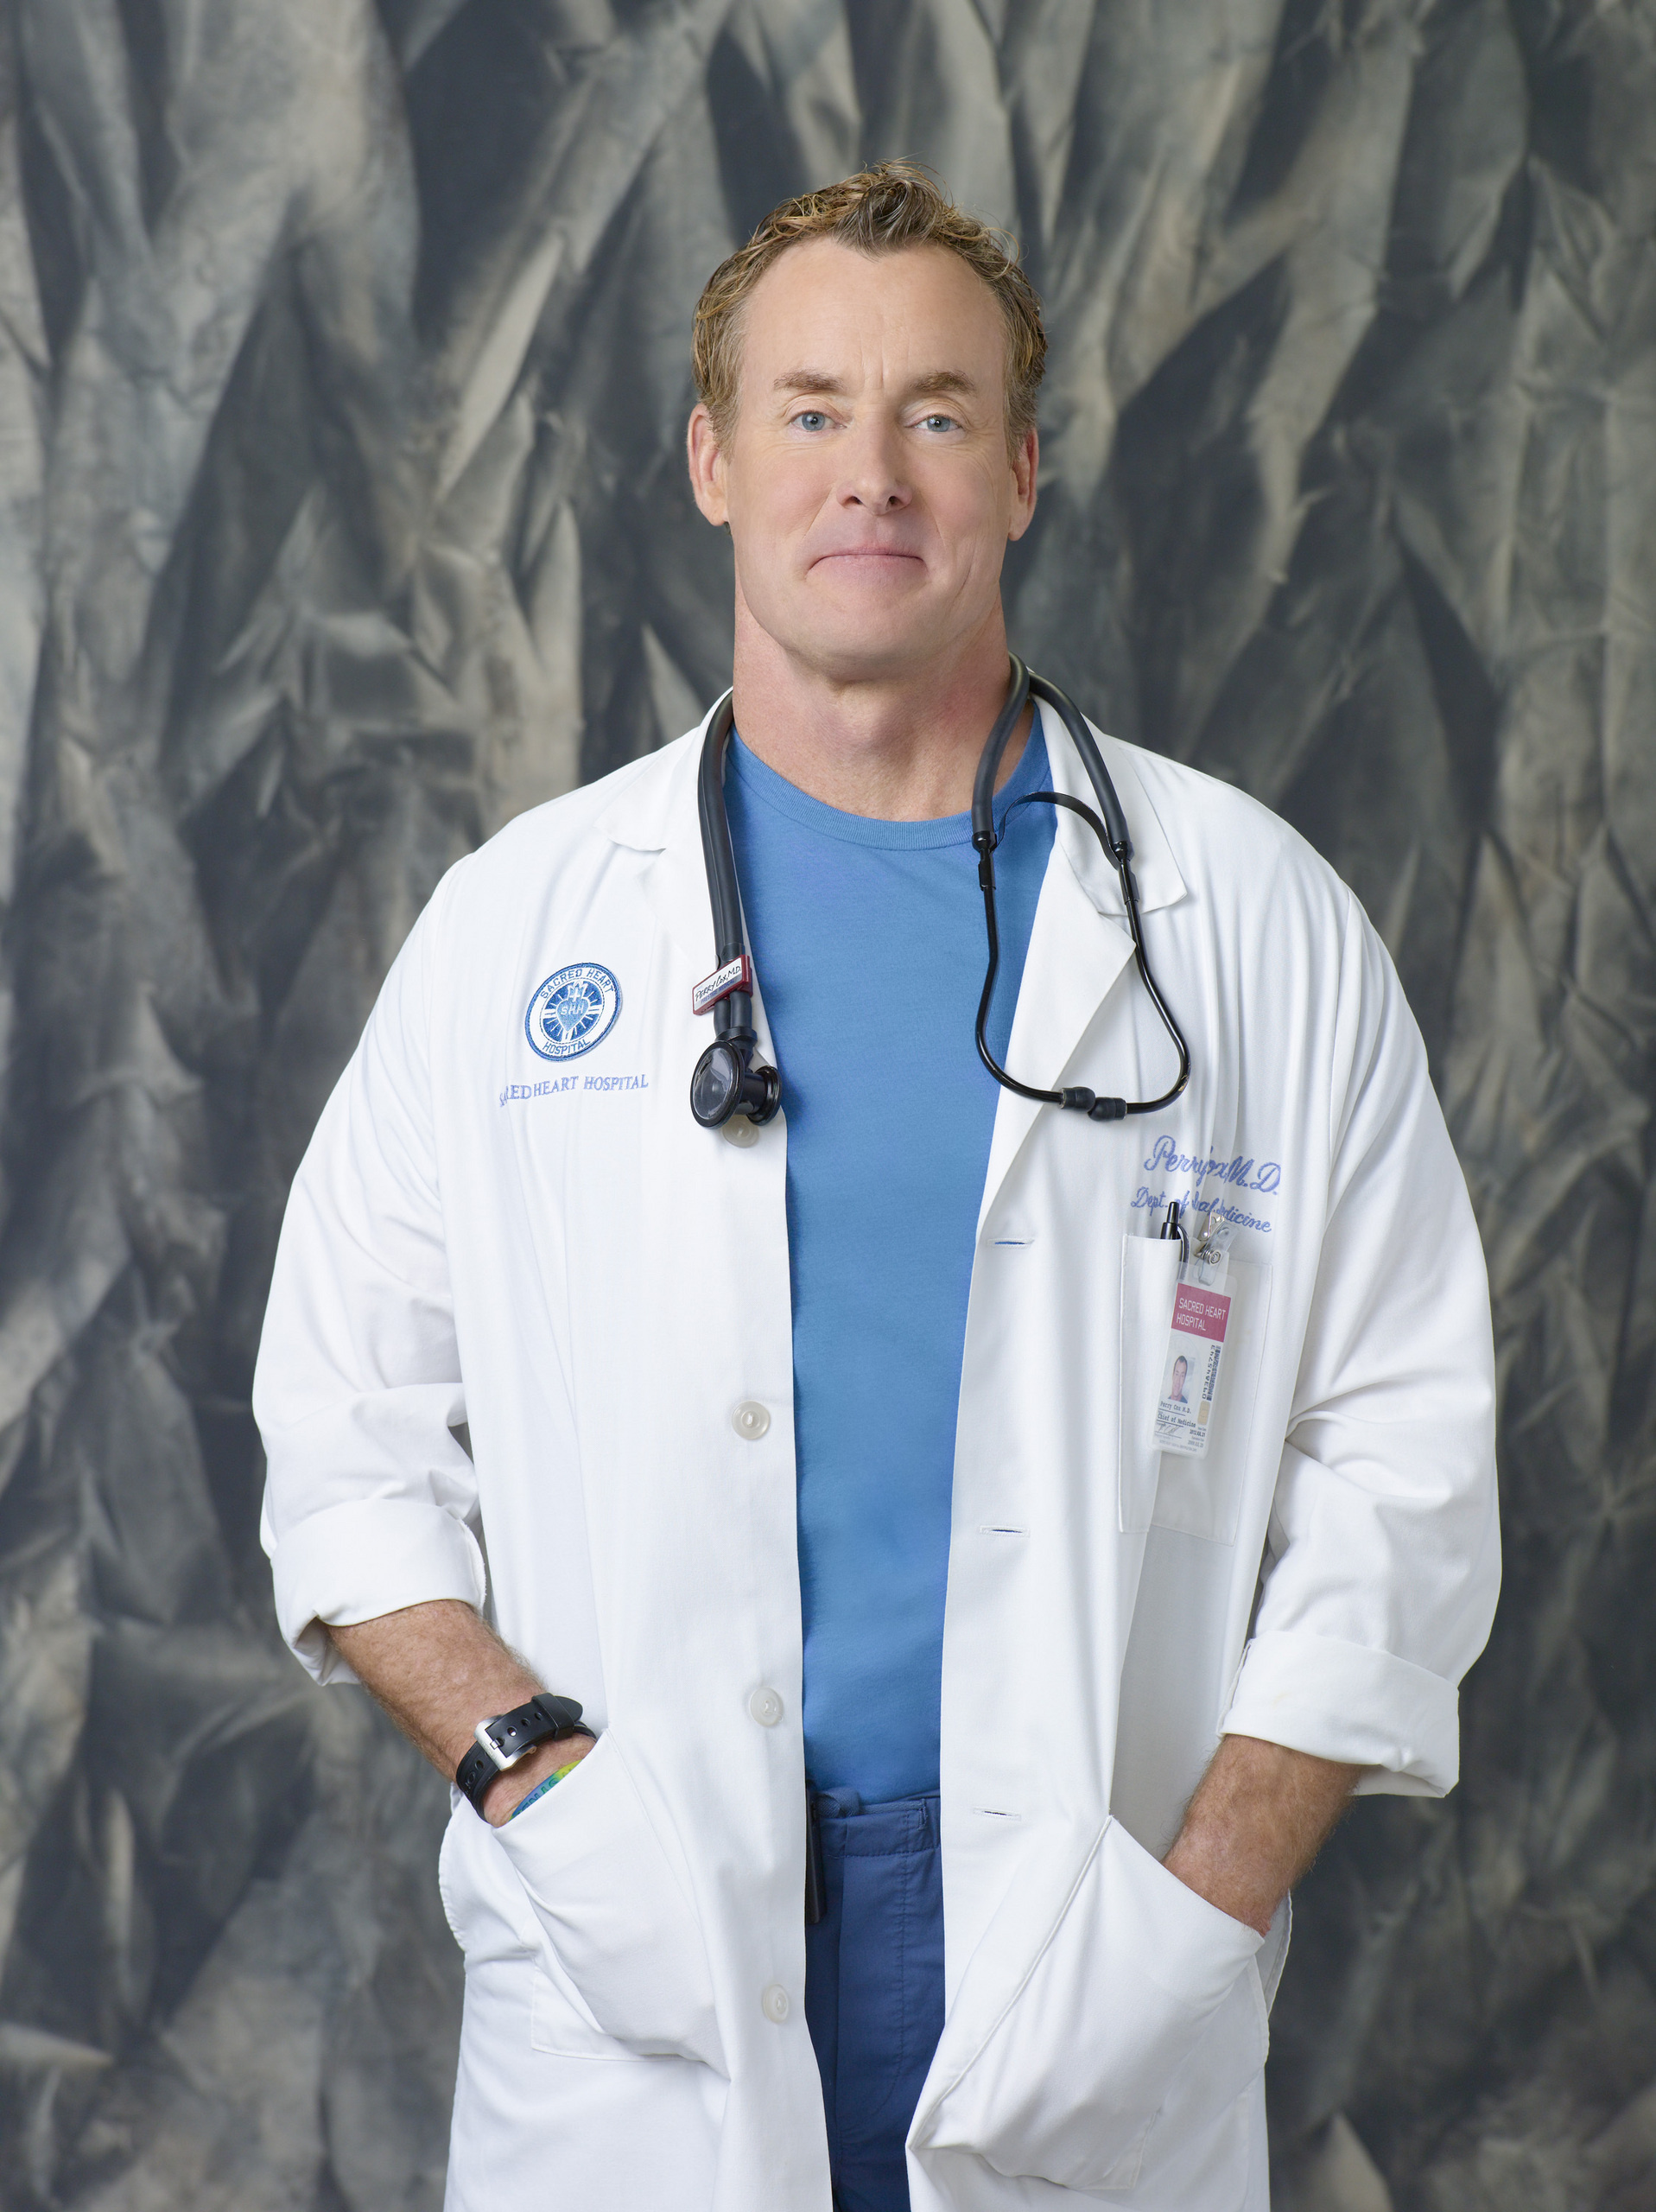 Scrubs (TV Series): John C. McGinley as Perry Cox, Routinely criticizes, patronizes, and calls J.D. female names. 1920x2560 HD Wallpaper.